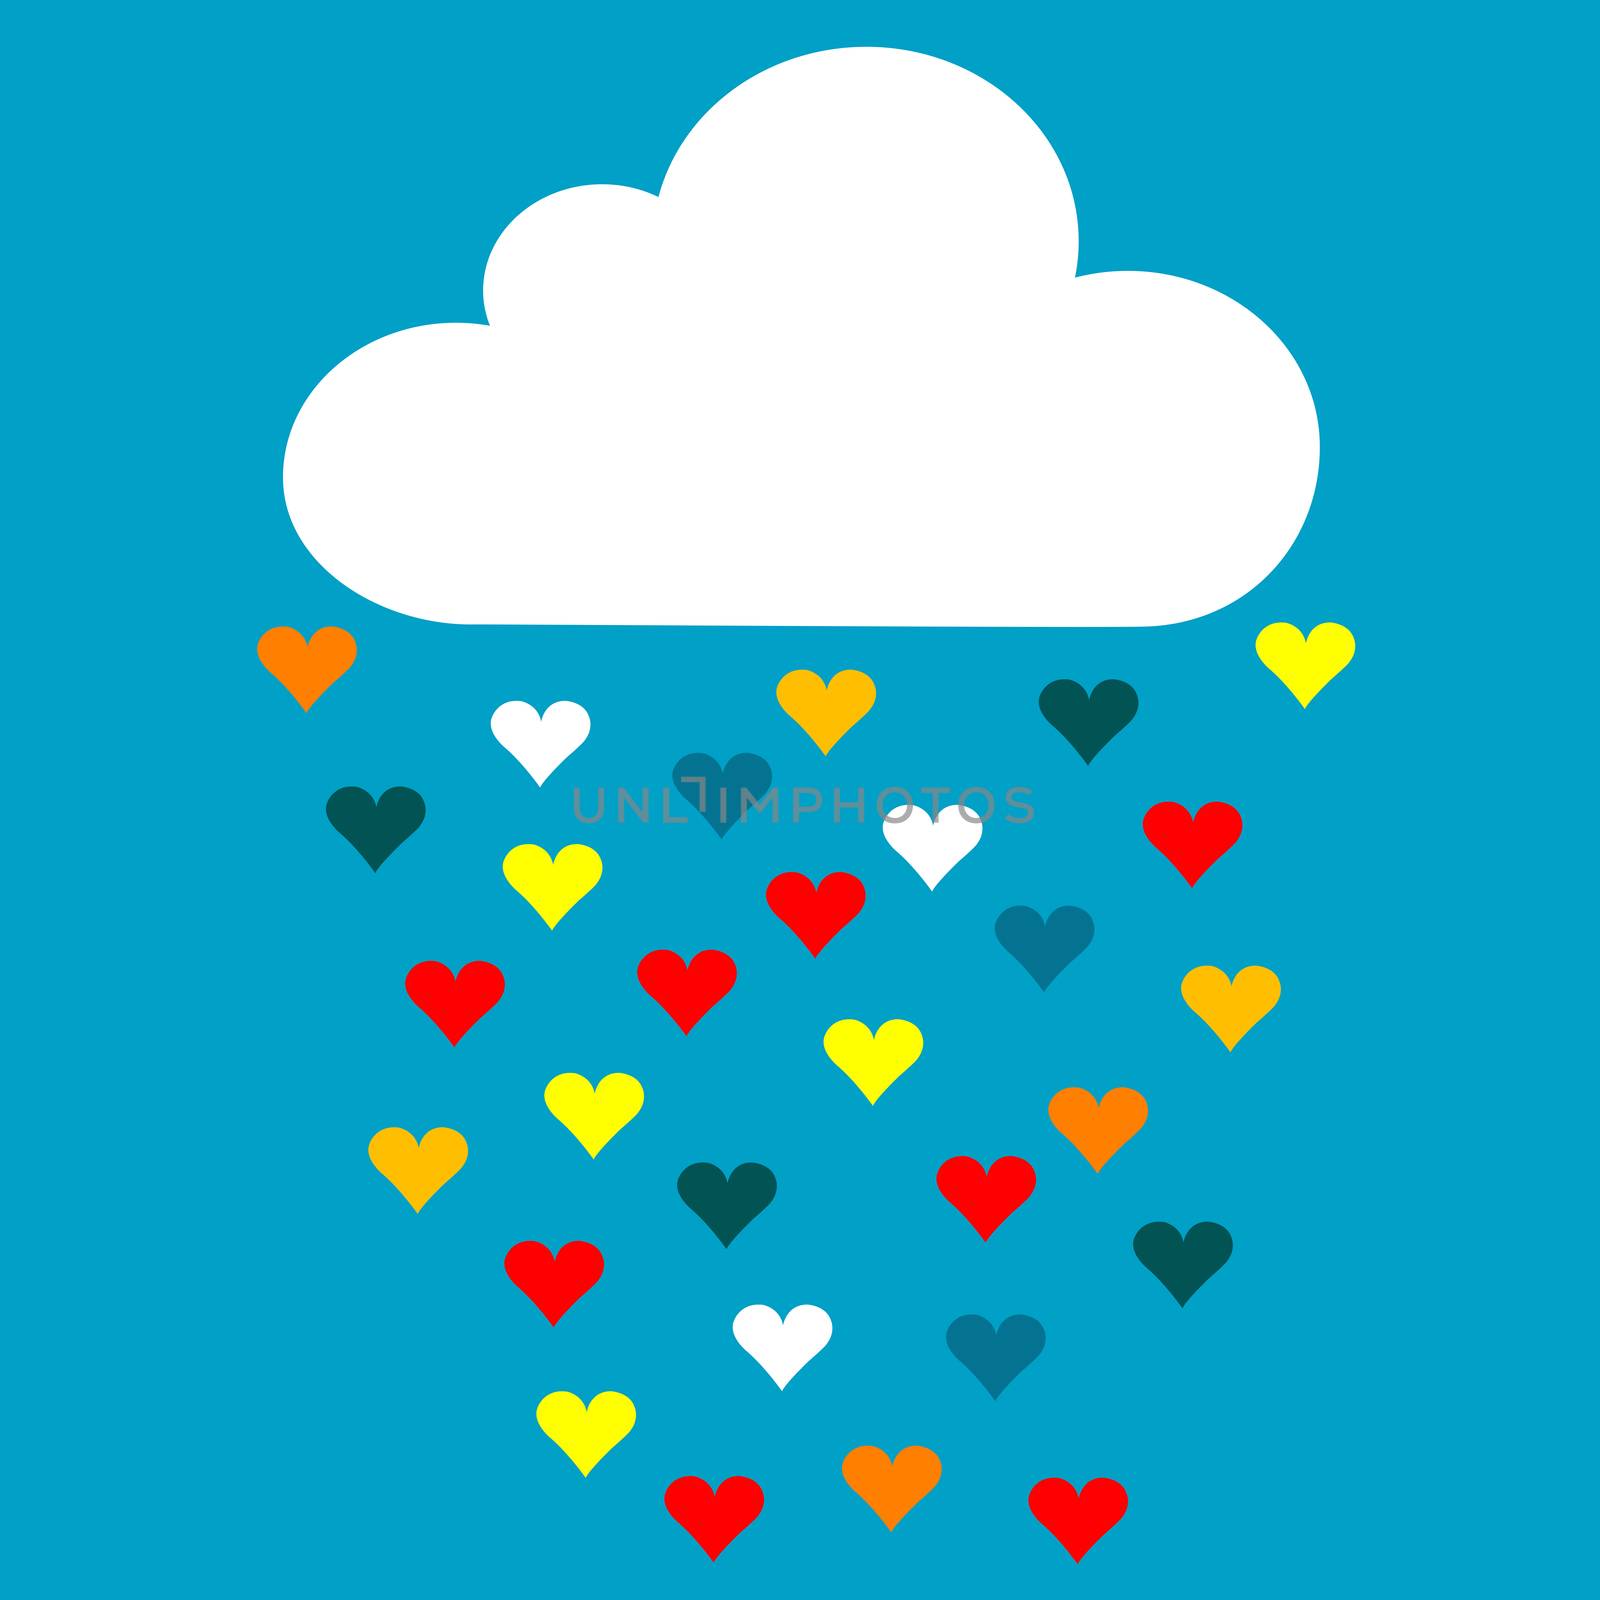 Cartoon cloud with rain drops of colored hearts in the blue sky